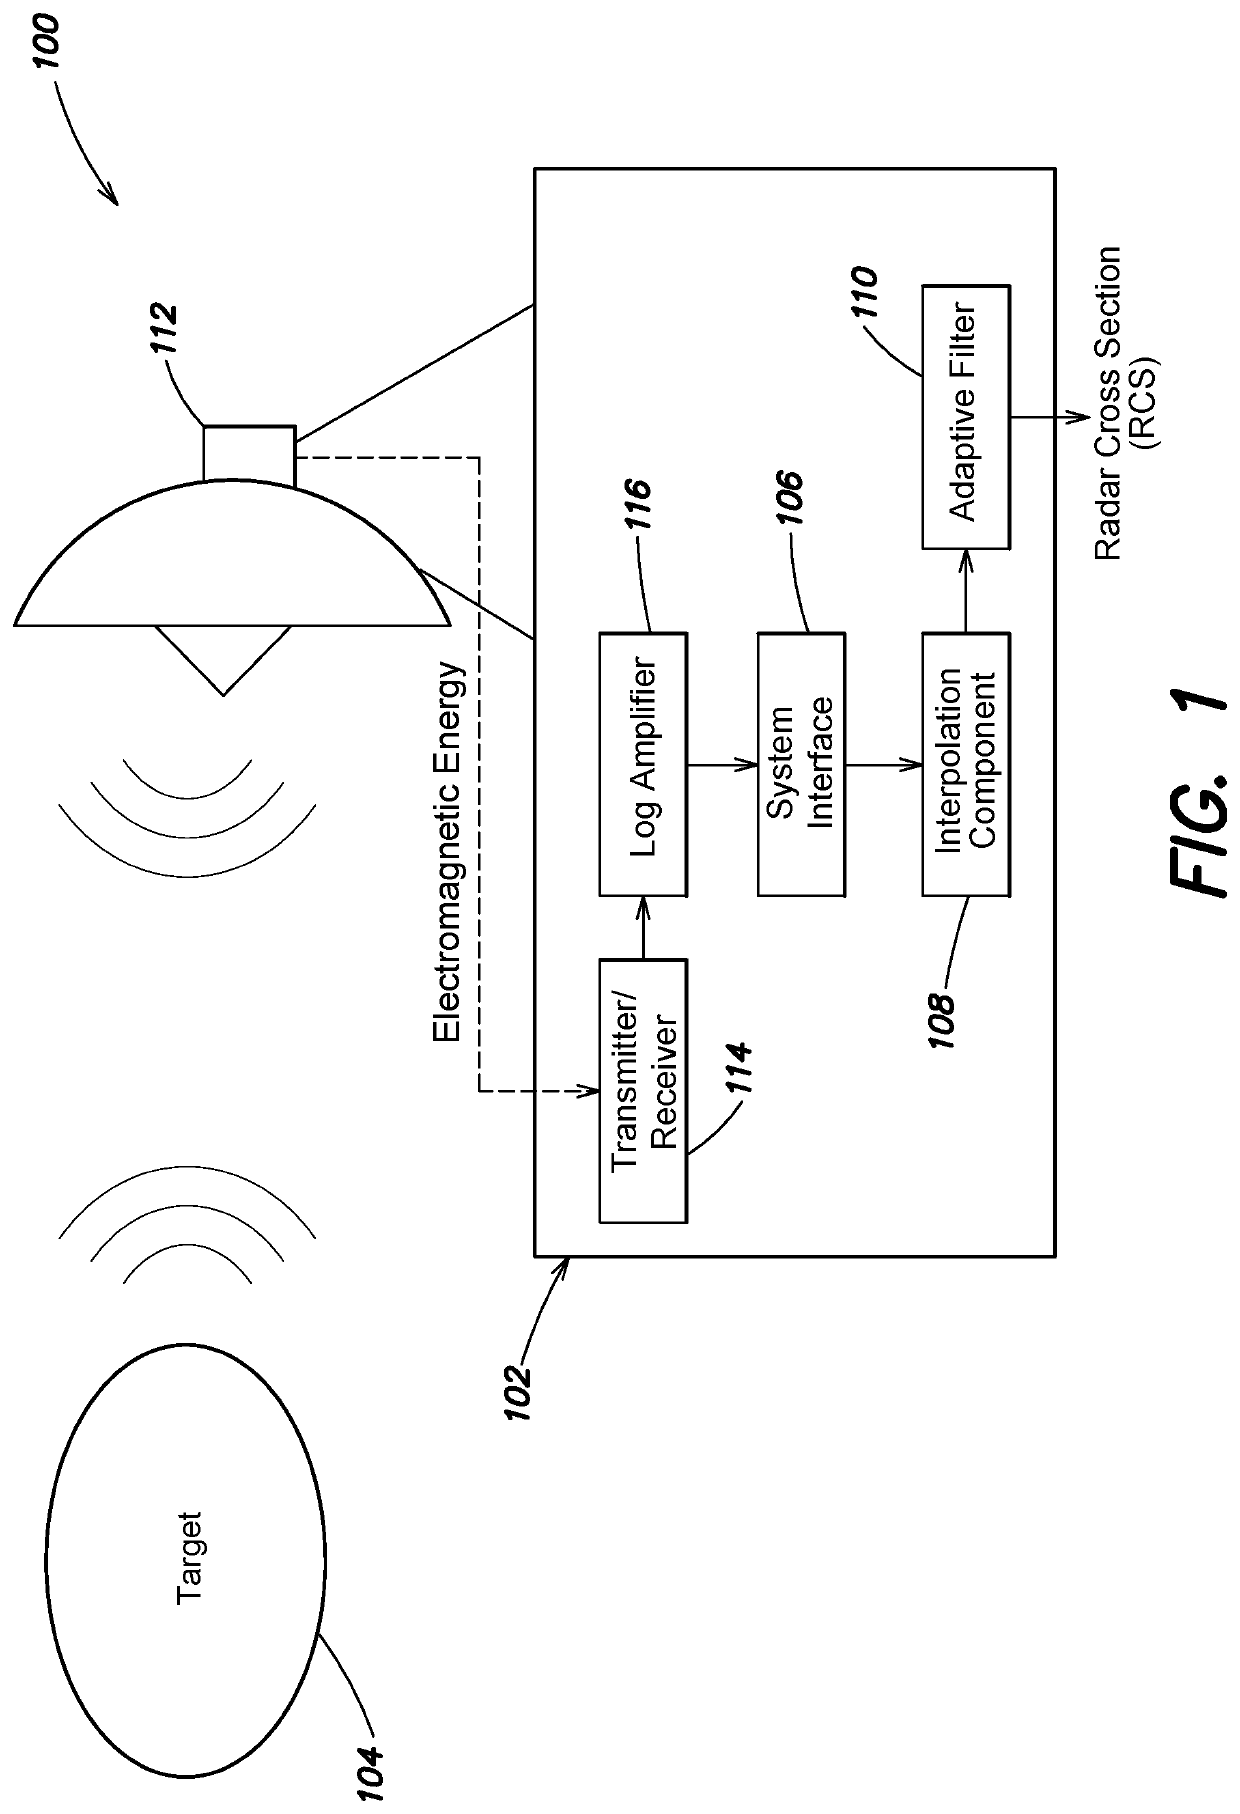 Systems and methods for interpolation in systems with non-linear quantization